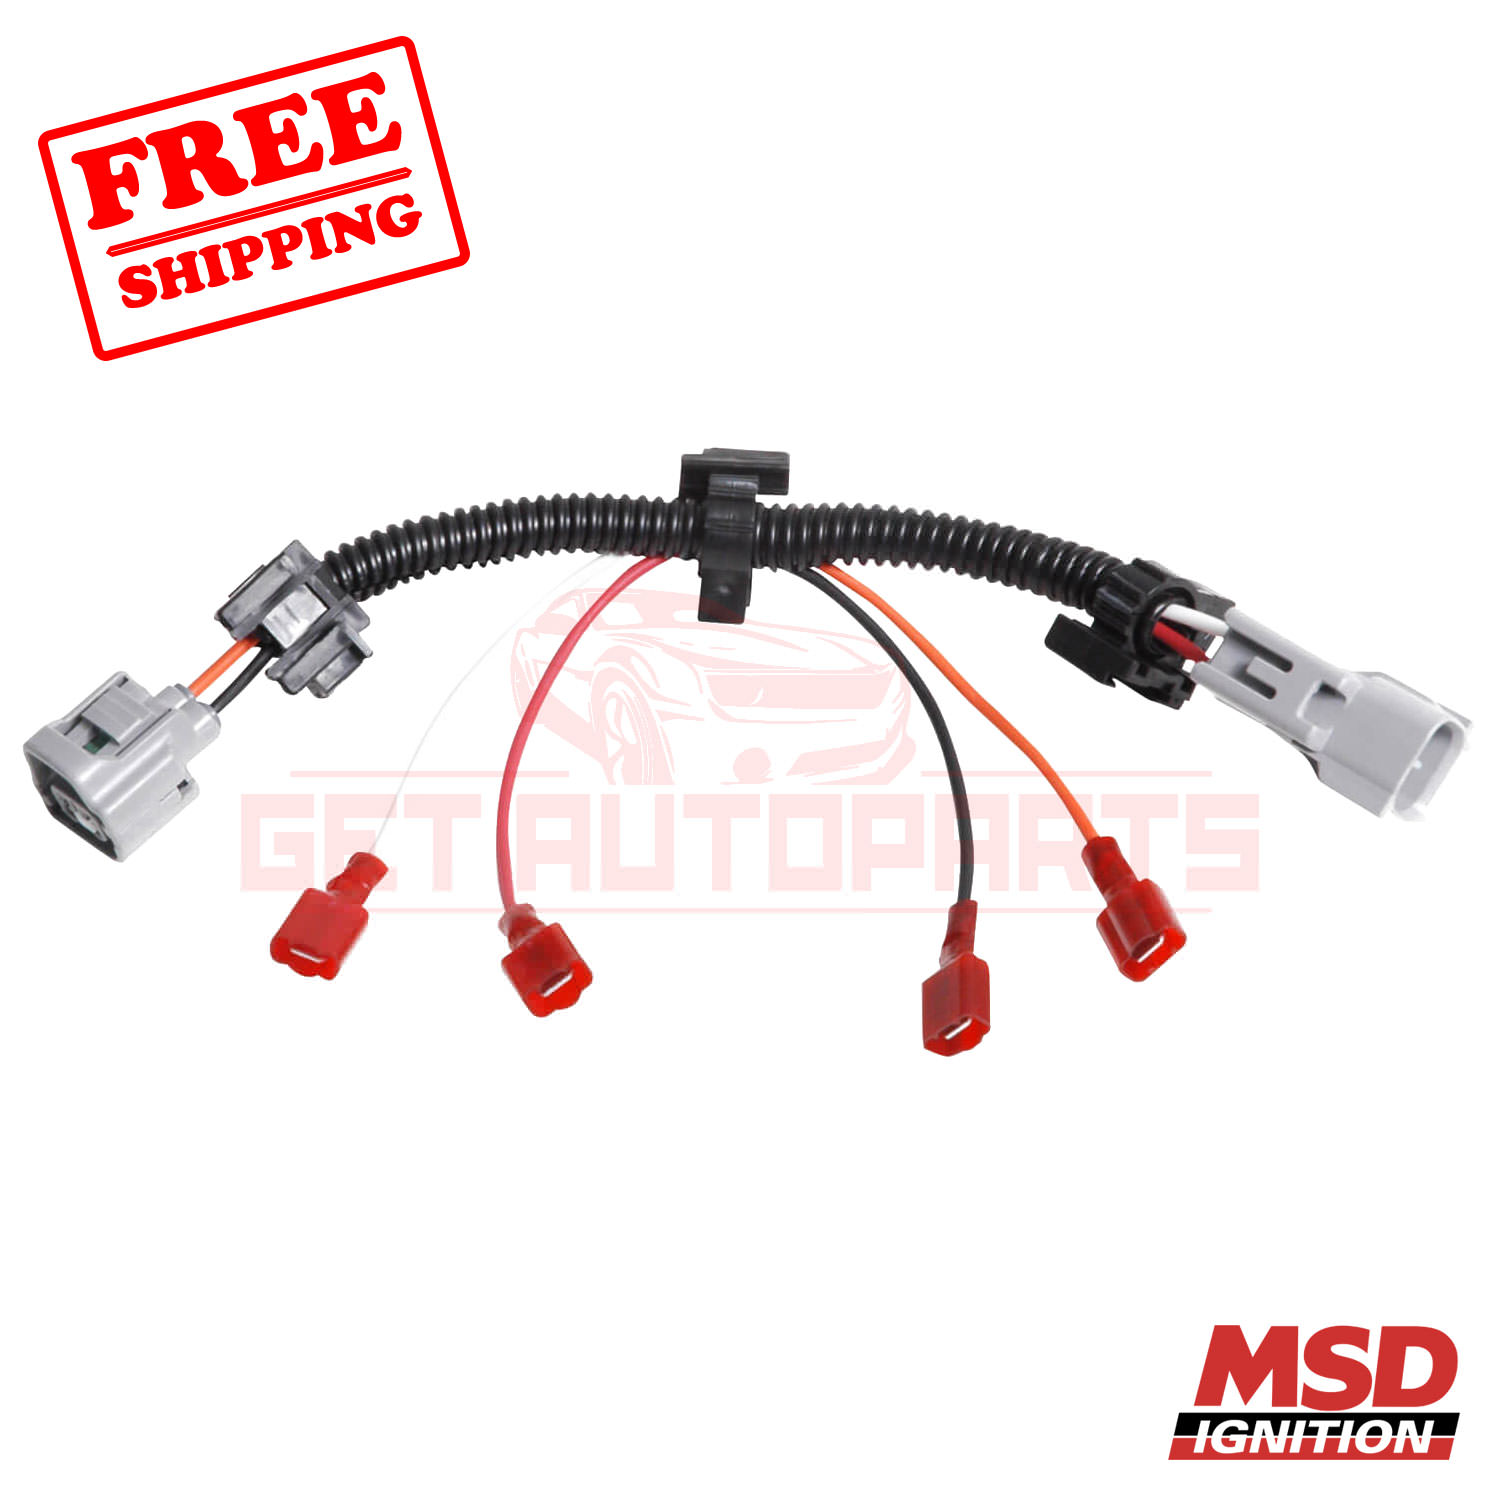 MSD Engine Wiring Harness for Chrysler Voyager 2000-2003